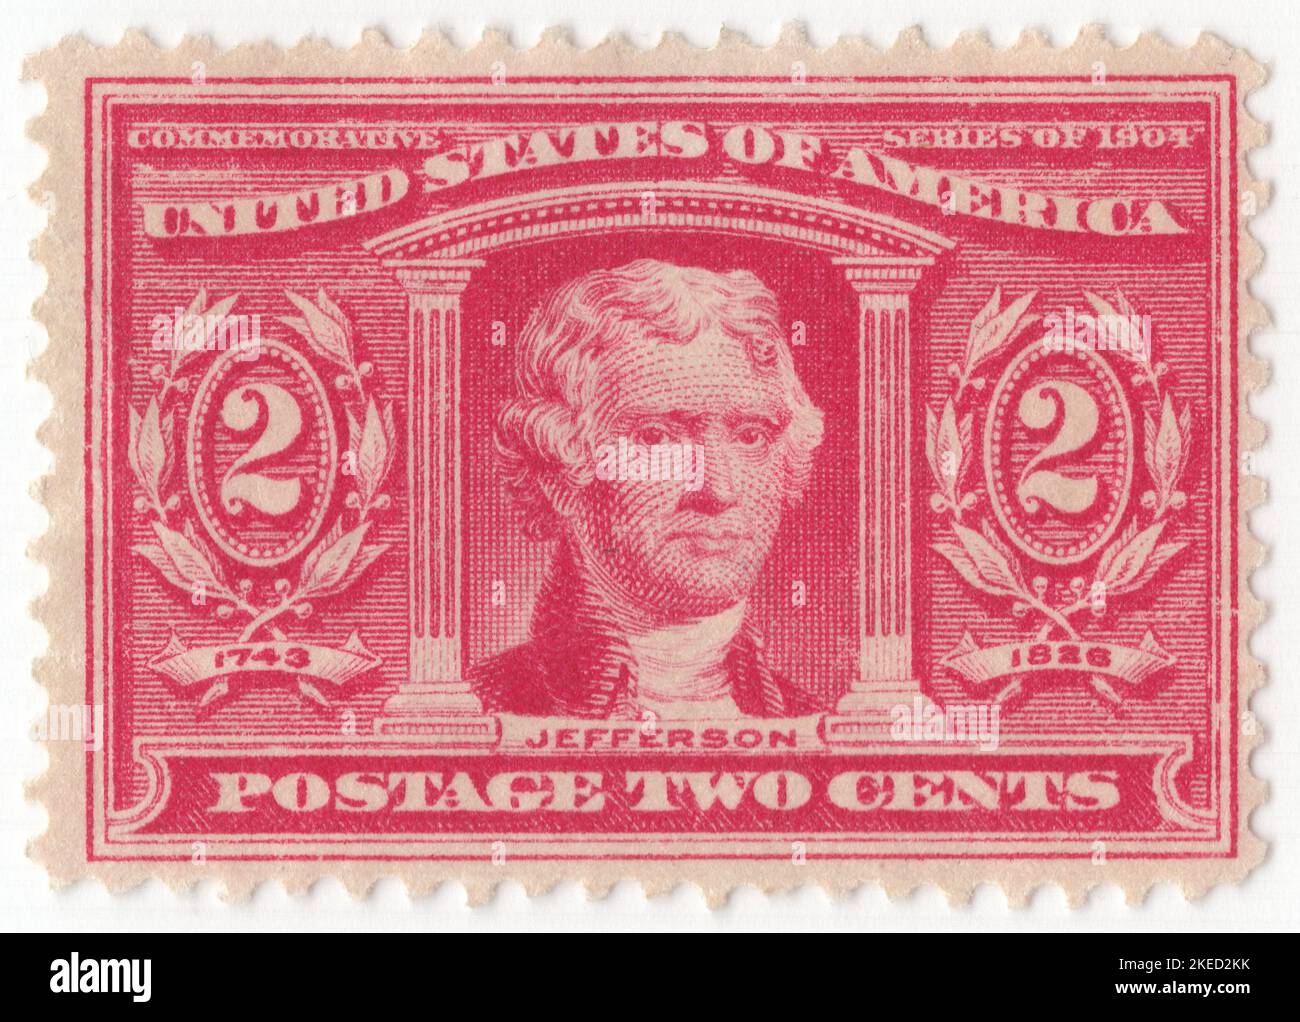 USA - 1904: An 2 cents carmine postage stamp depicting portrait of Thomas Jefferson, American statesman, diplomat, lawyer, architect, philosopher, and Founding Father who served as the third president of the United States from 1801 to 1809. Louisiana Purchase Exposition. He was previously the second vice president under John Adams and the first United States secretary of state under George Washington. The principal author of the Declaration of Independence, Jefferson was a proponent of democracy, republicanism, and individual rights, motivating American colonists to break from the Britain Stock Photo